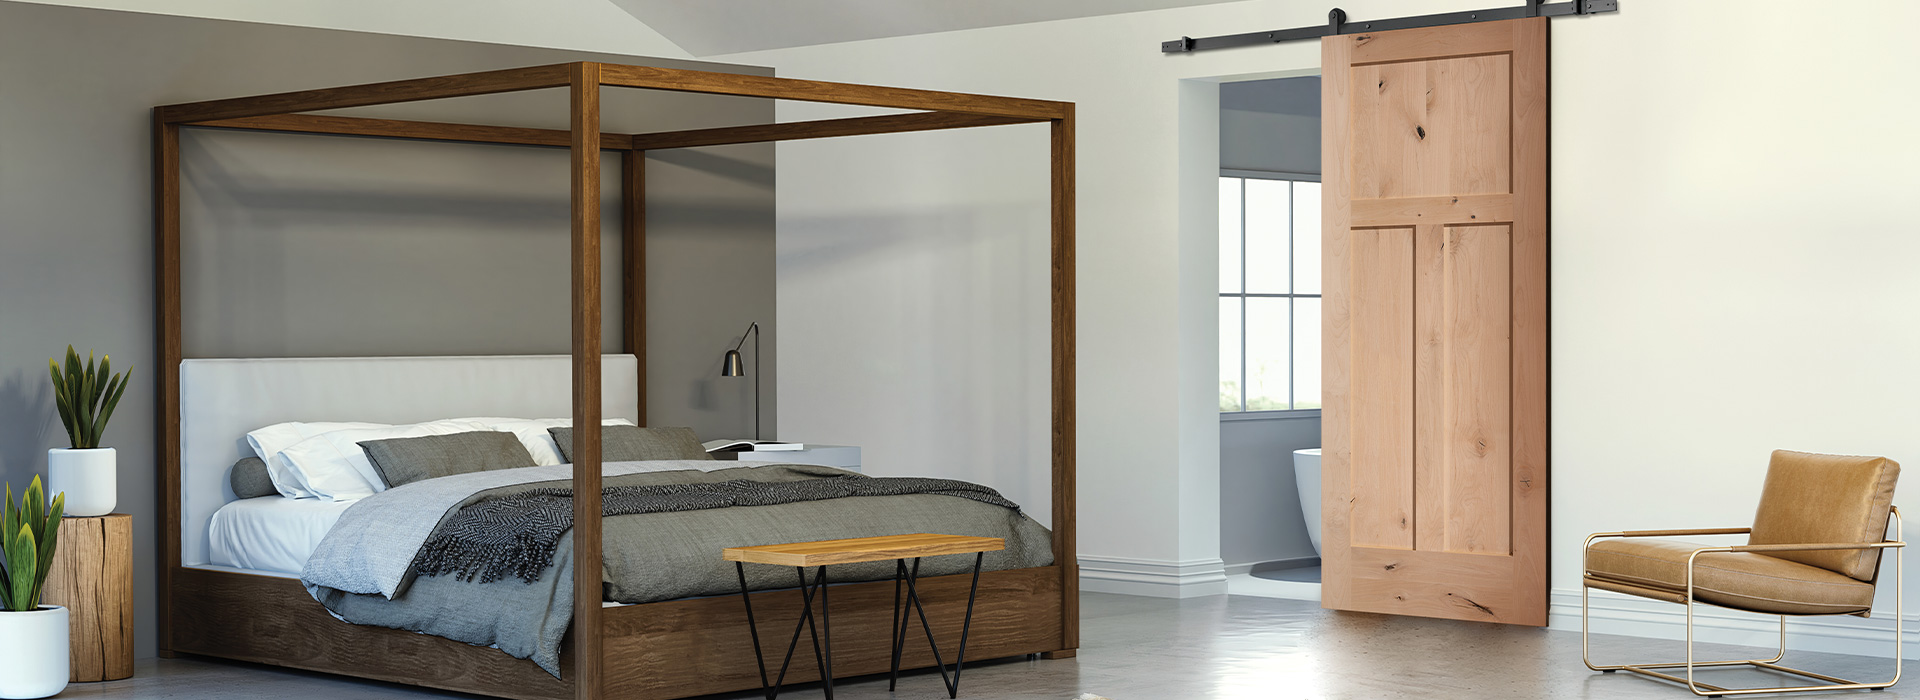 Modern bedroom with rustic elements with an interior Craftsman style 3 panel Knotty Alder Shaker door